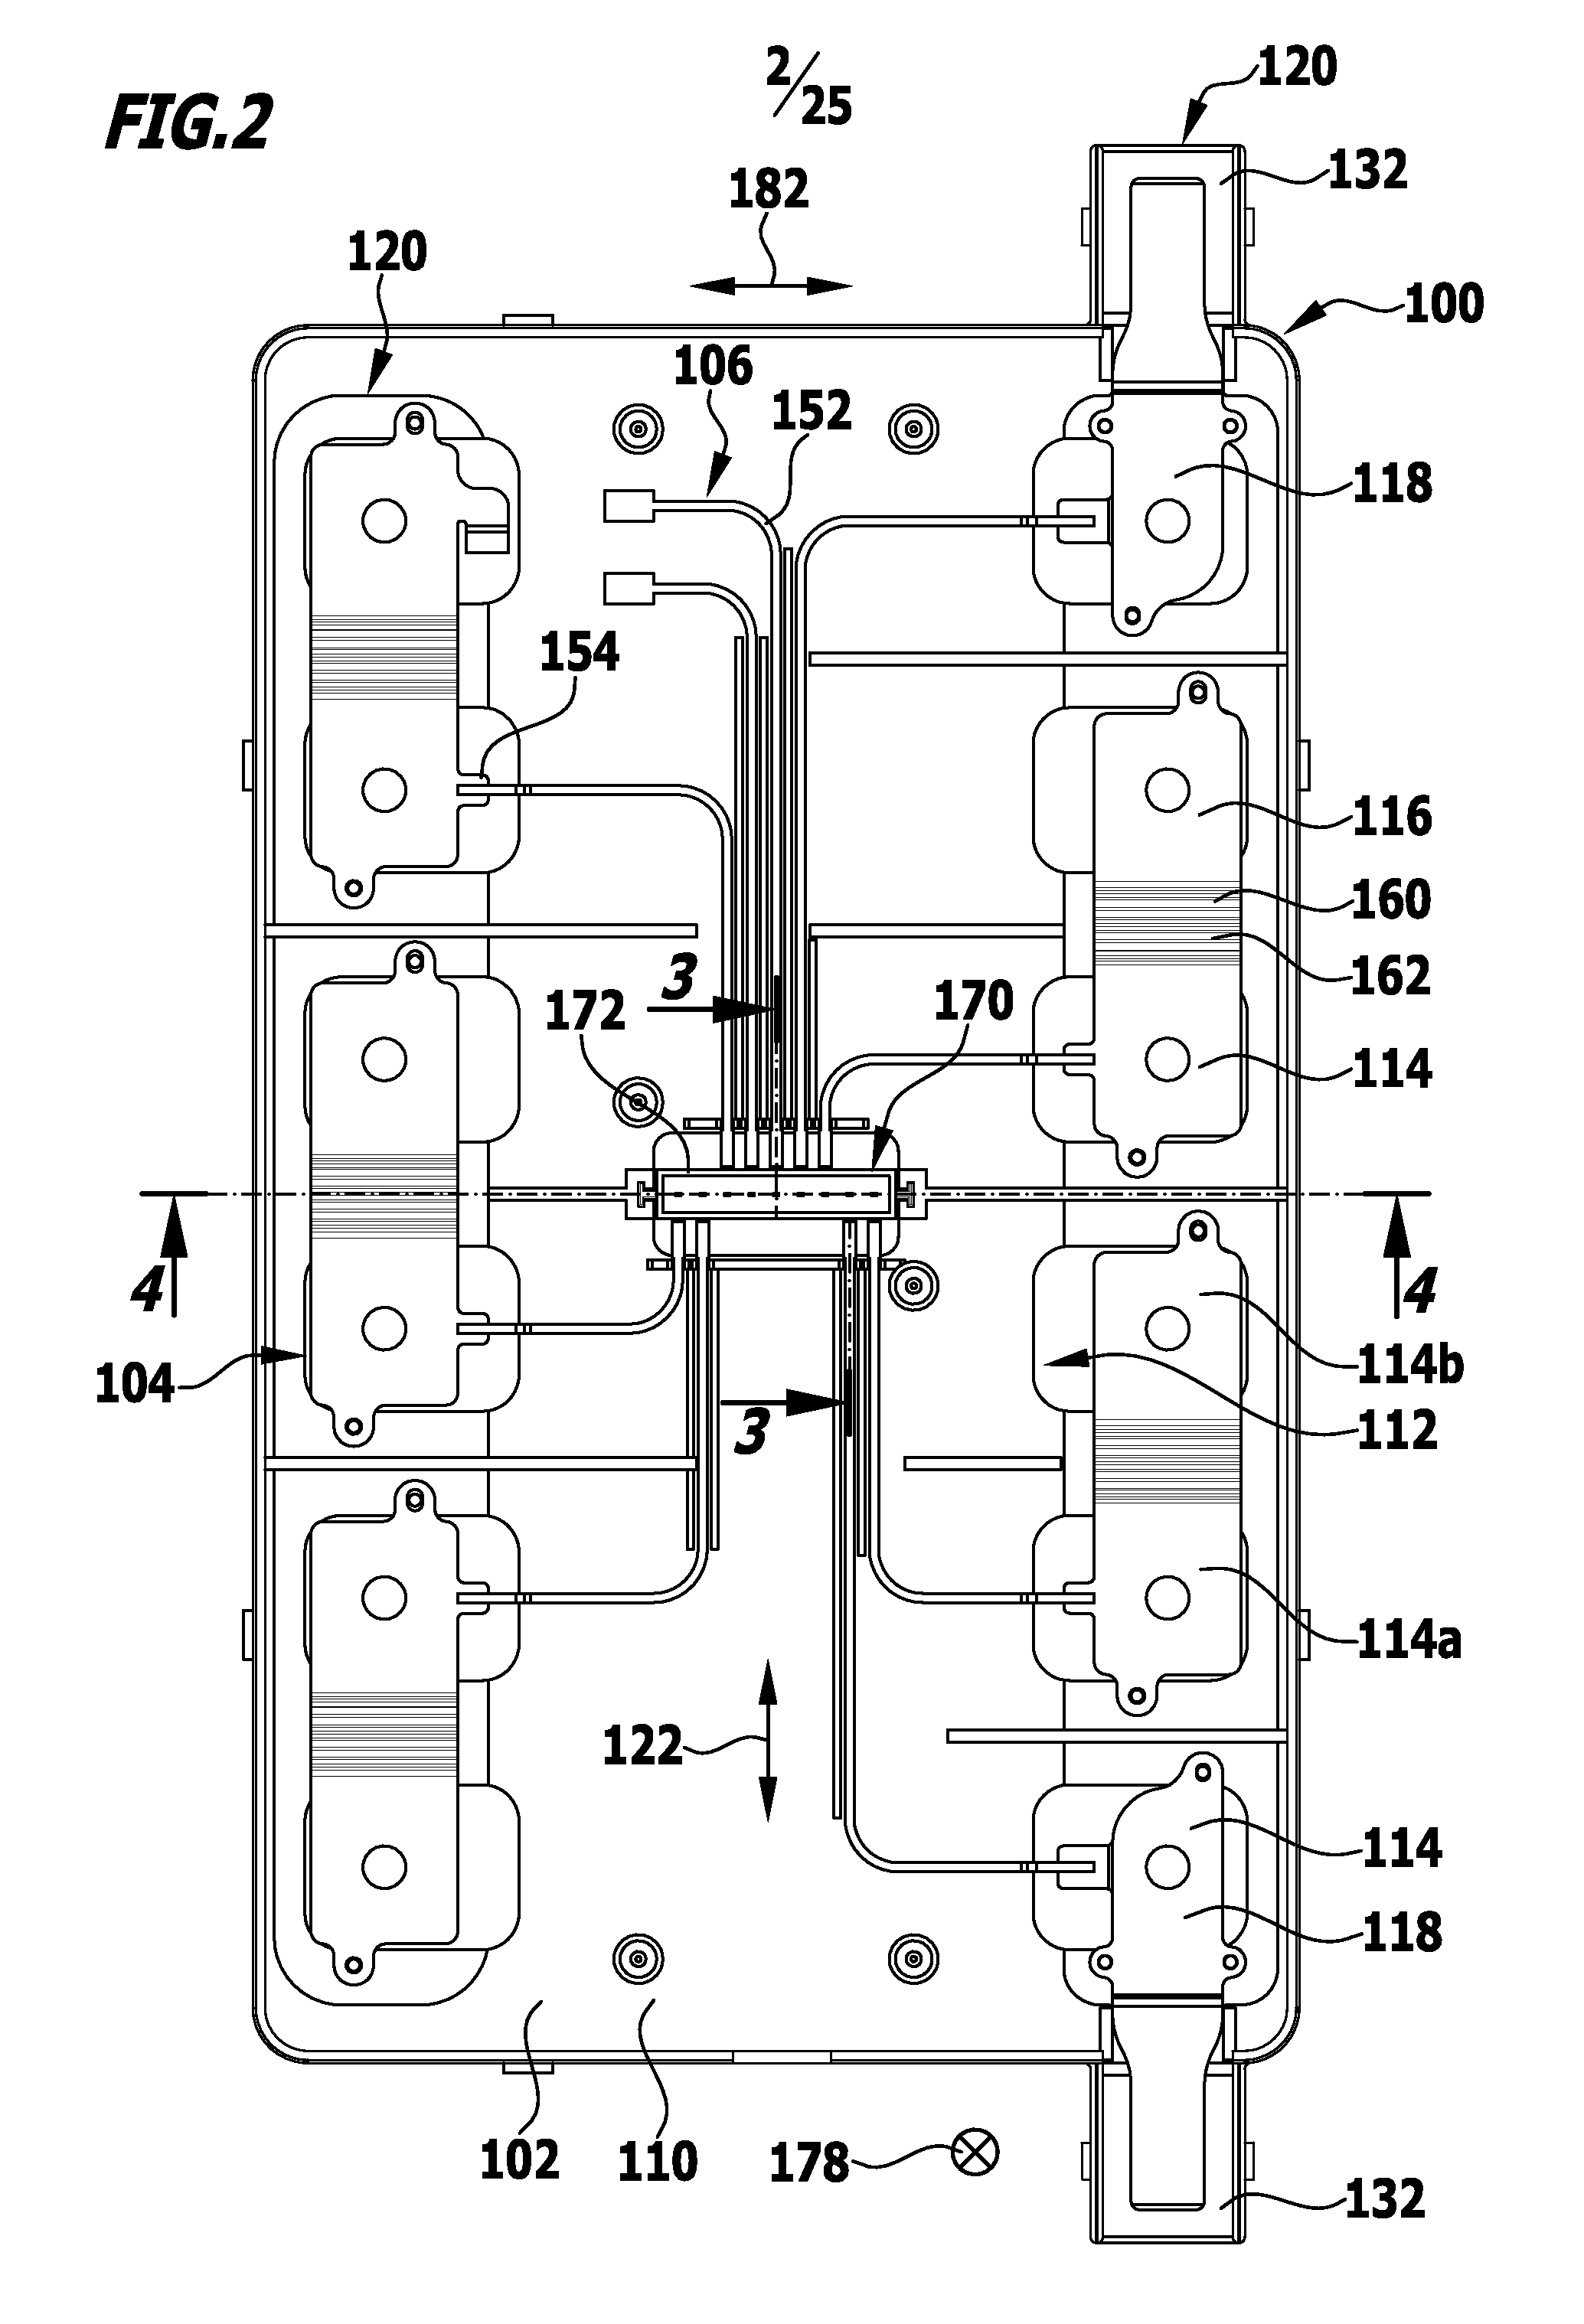 Cell contact-making system for an electrochemical device